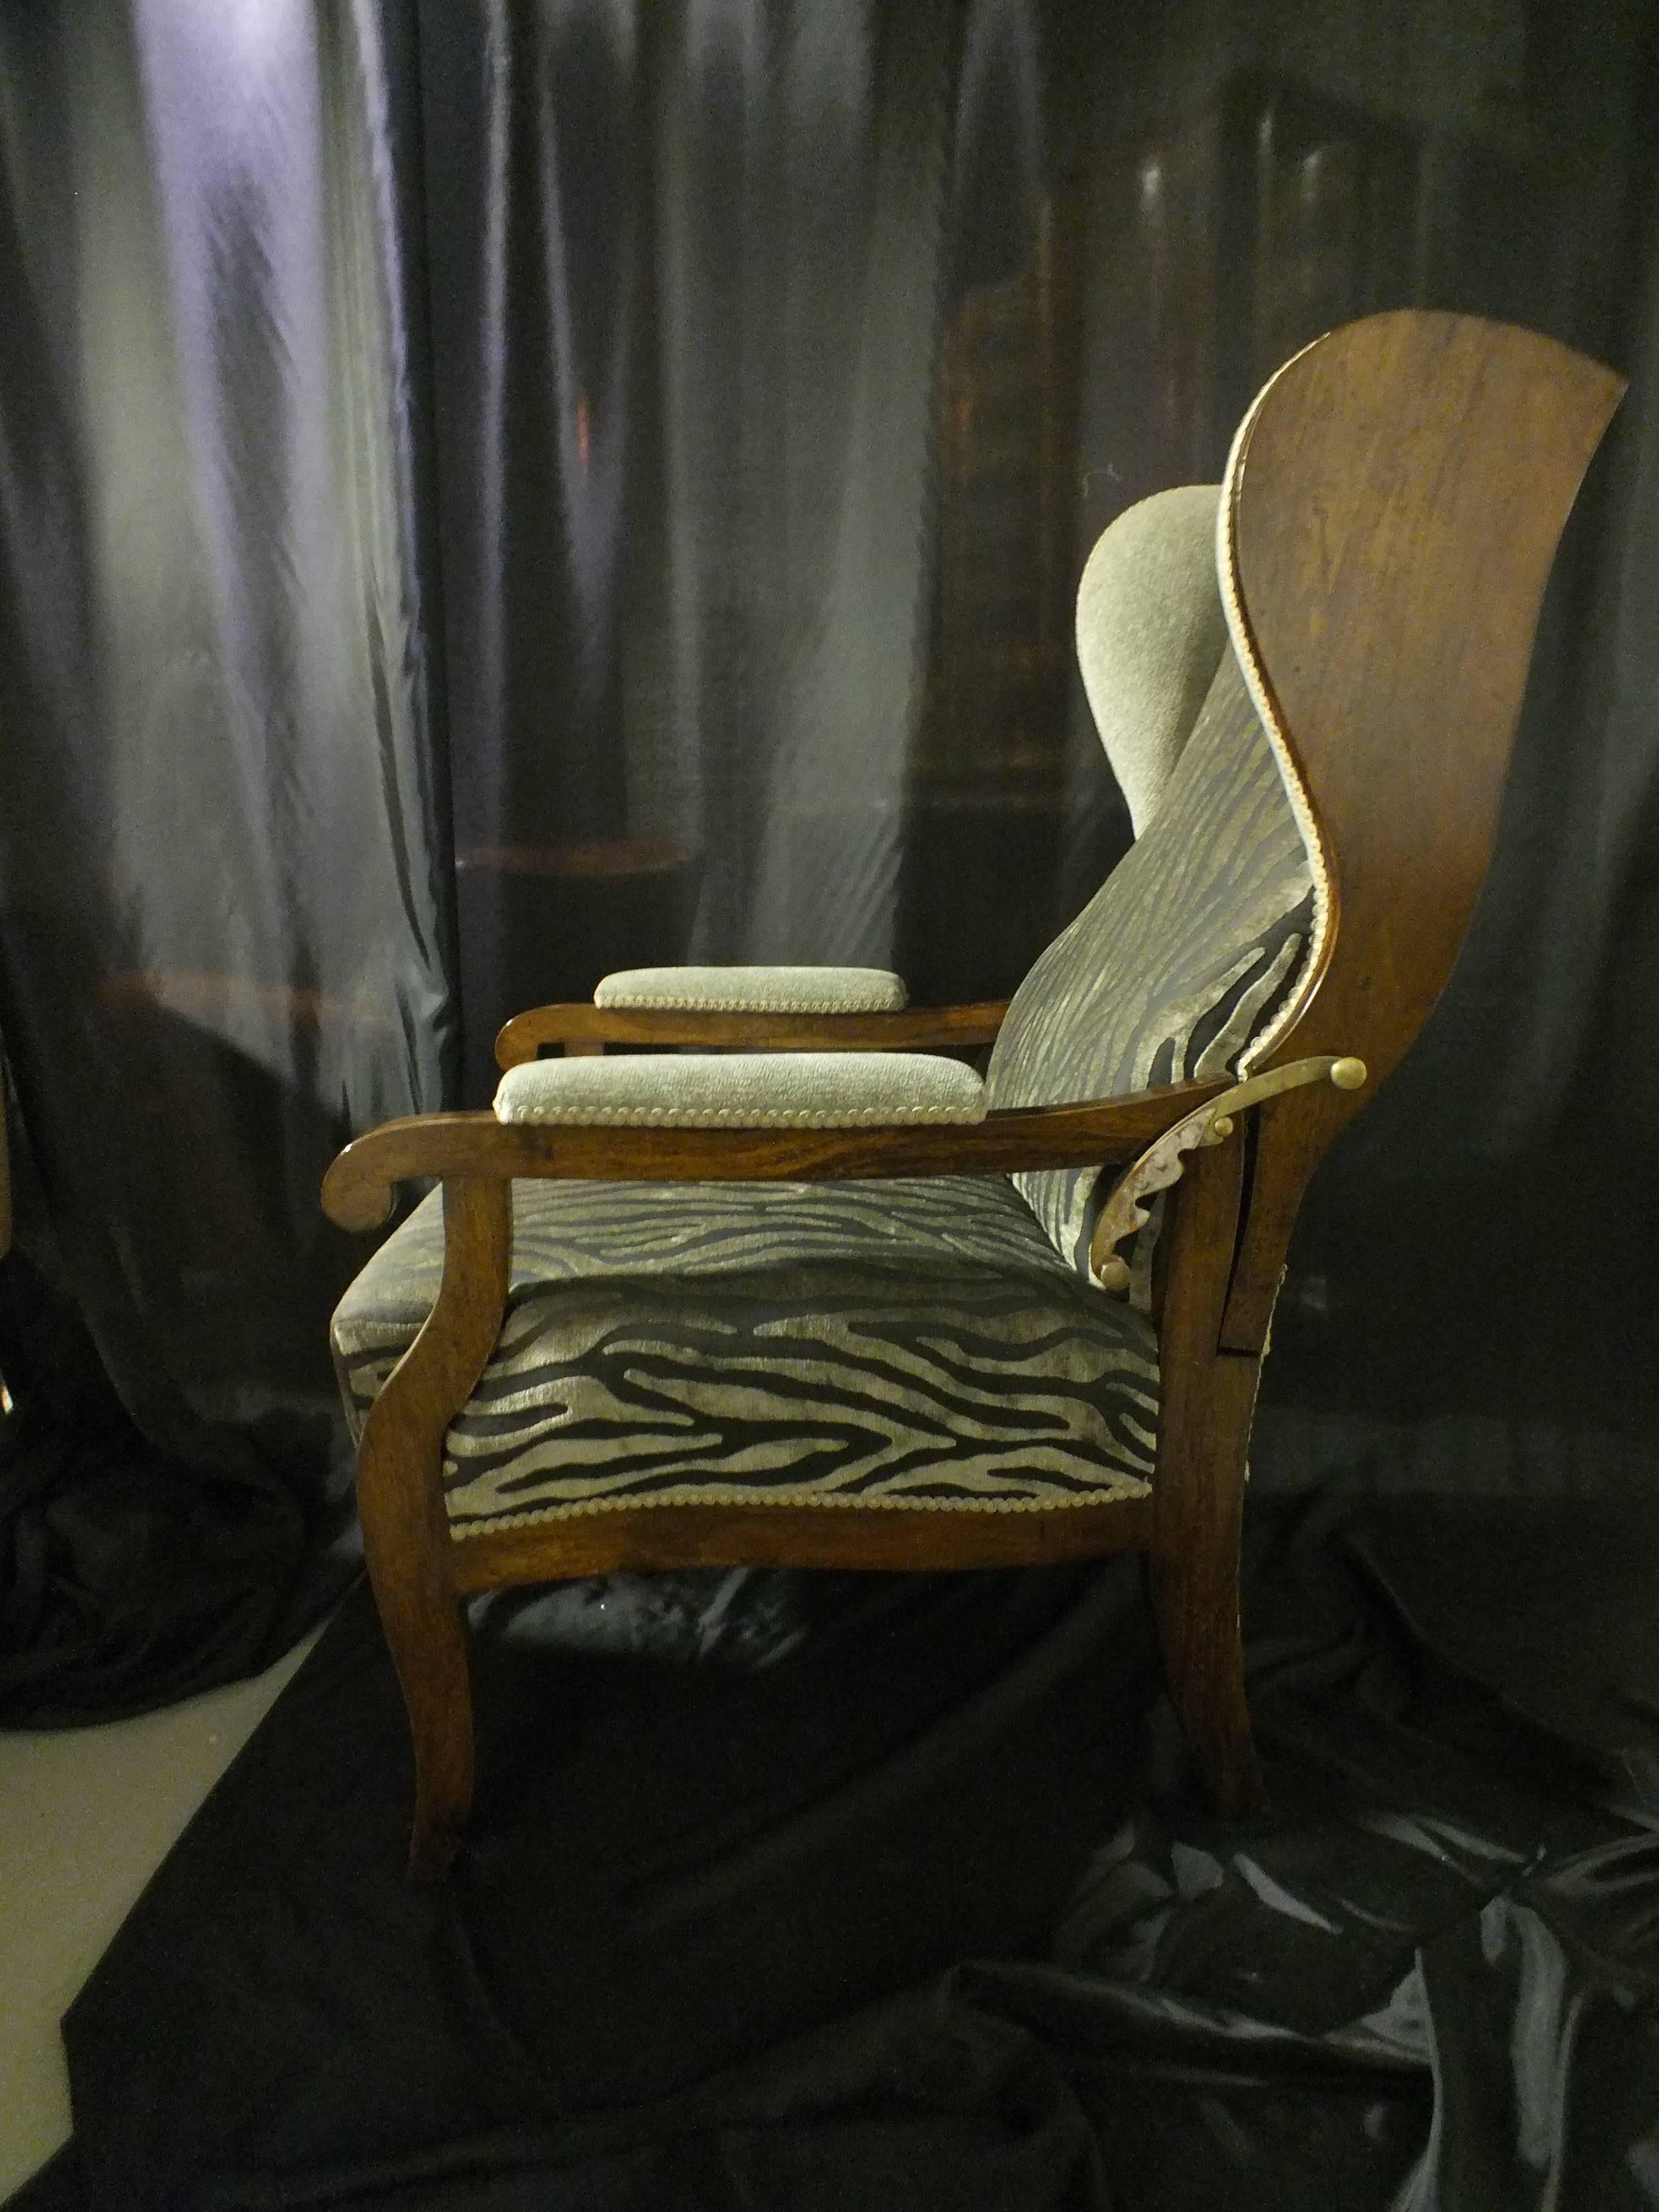 Folding wingchair Biedermeier 1880 nutwood

Back is foldable, original metal fittings available
high seating comfort, excellent for older people
Laced up traditionally on jute belts and upholstered with naturel fibrous materials
Cover material